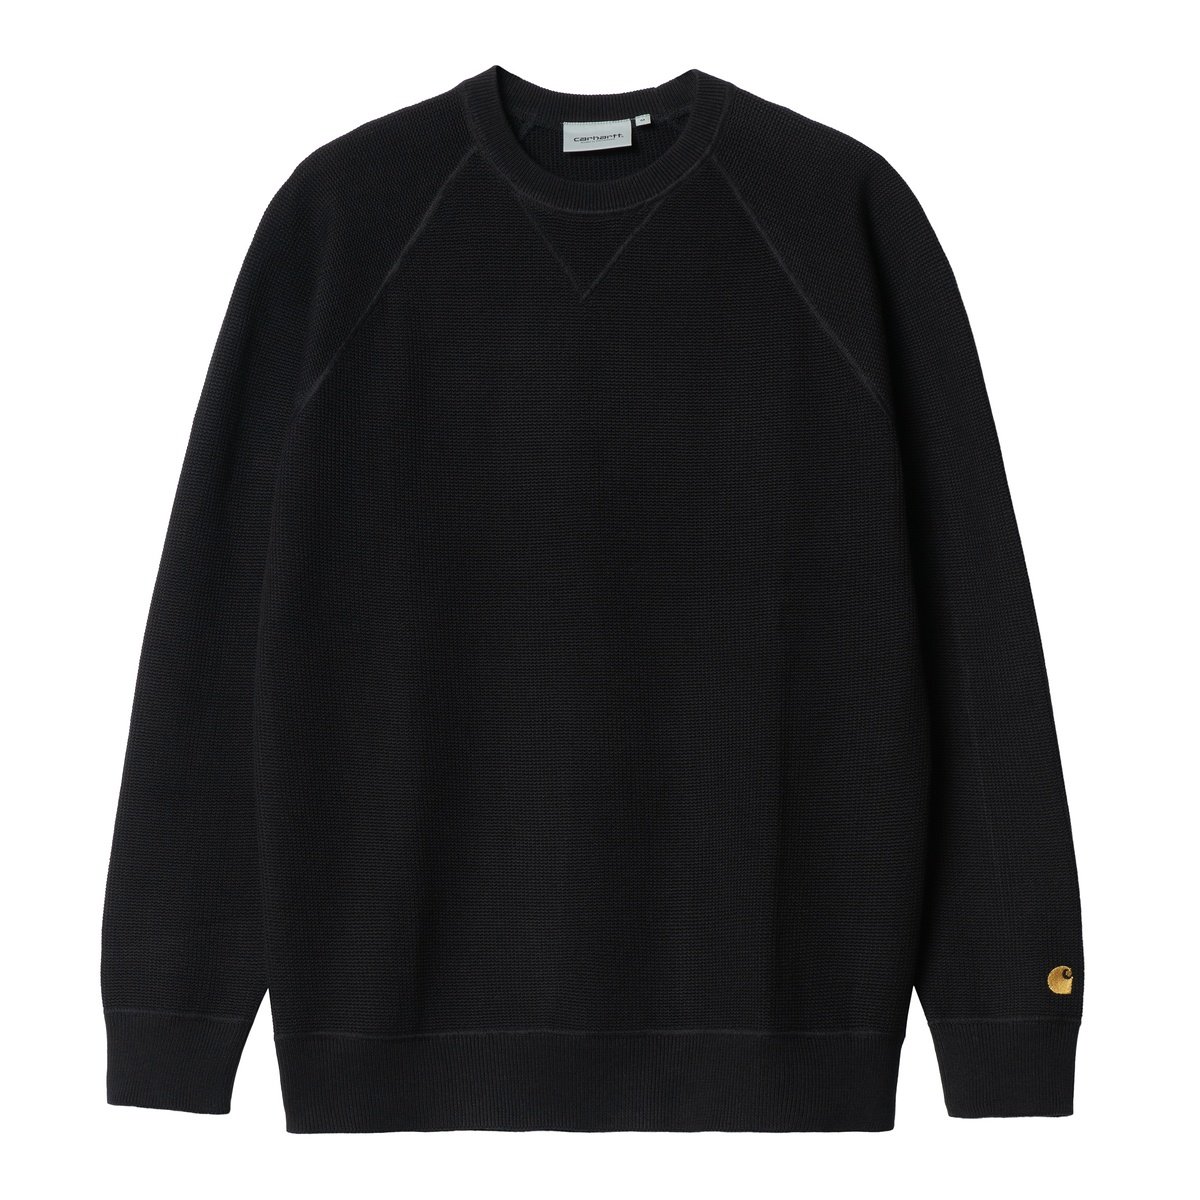 Chase Sweater "Black / Gold"